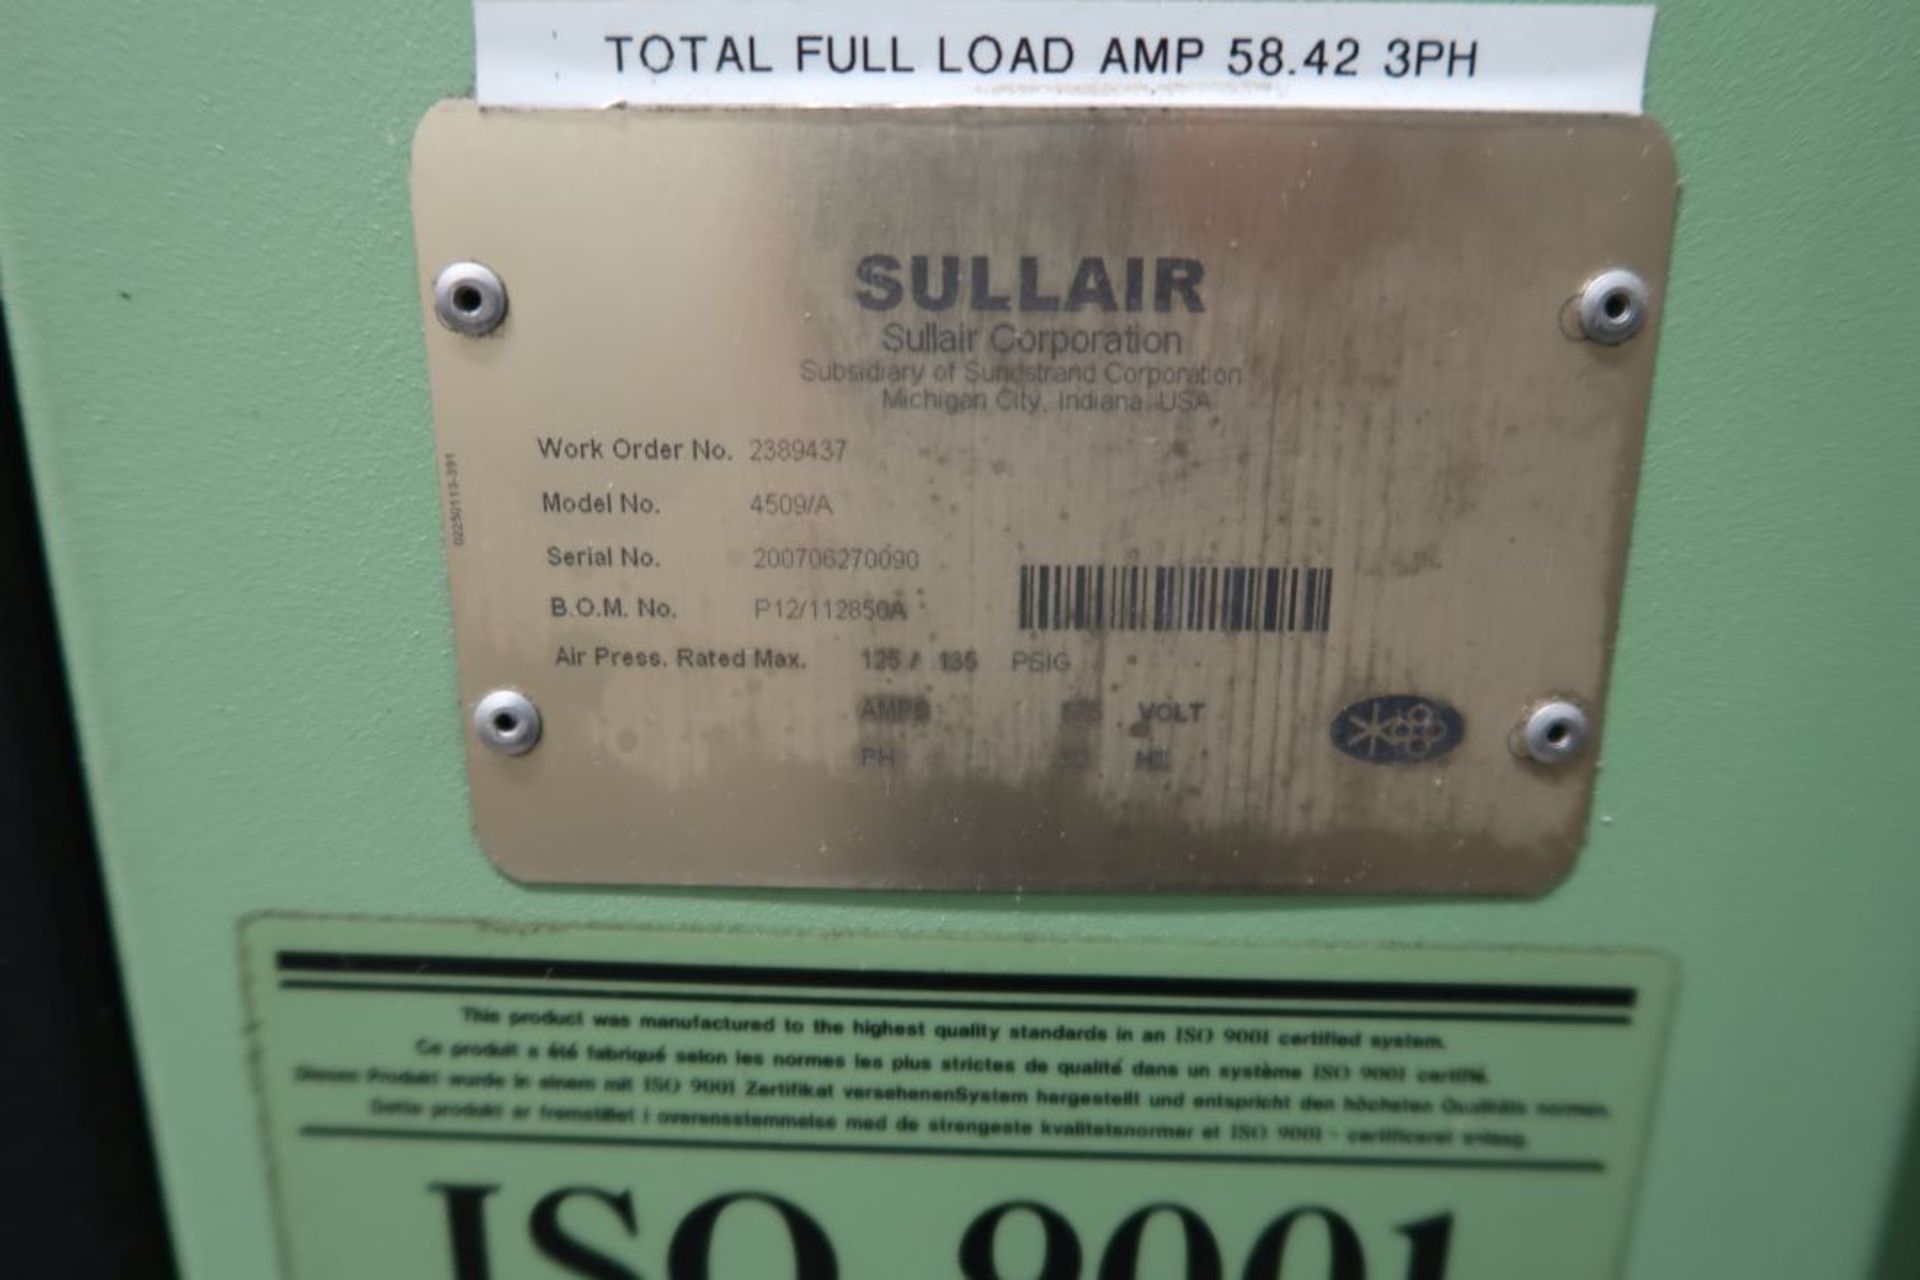 SULLAIR 60 HP SCREW TYPE AIR COMPRESSOR MOD: 4509/A, SN: 200706270090, 52205 HOURS, 575 VOLTS ** - Image 3 of 3